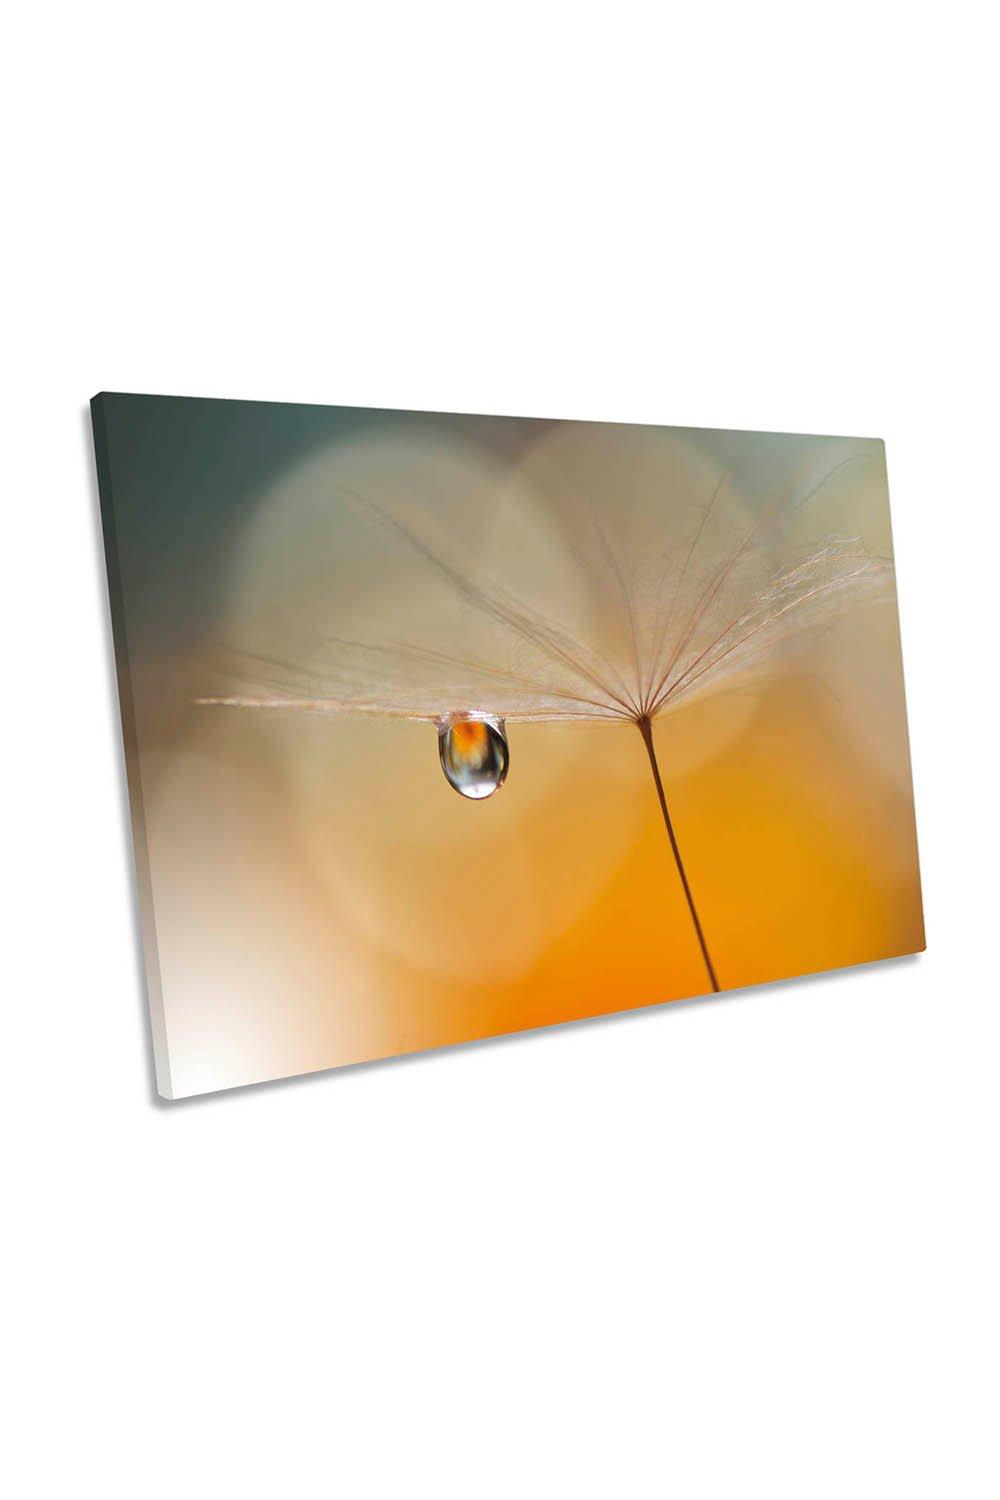 Dandelion Feather Water Drop Floral Canvas Wall Art Picture Print